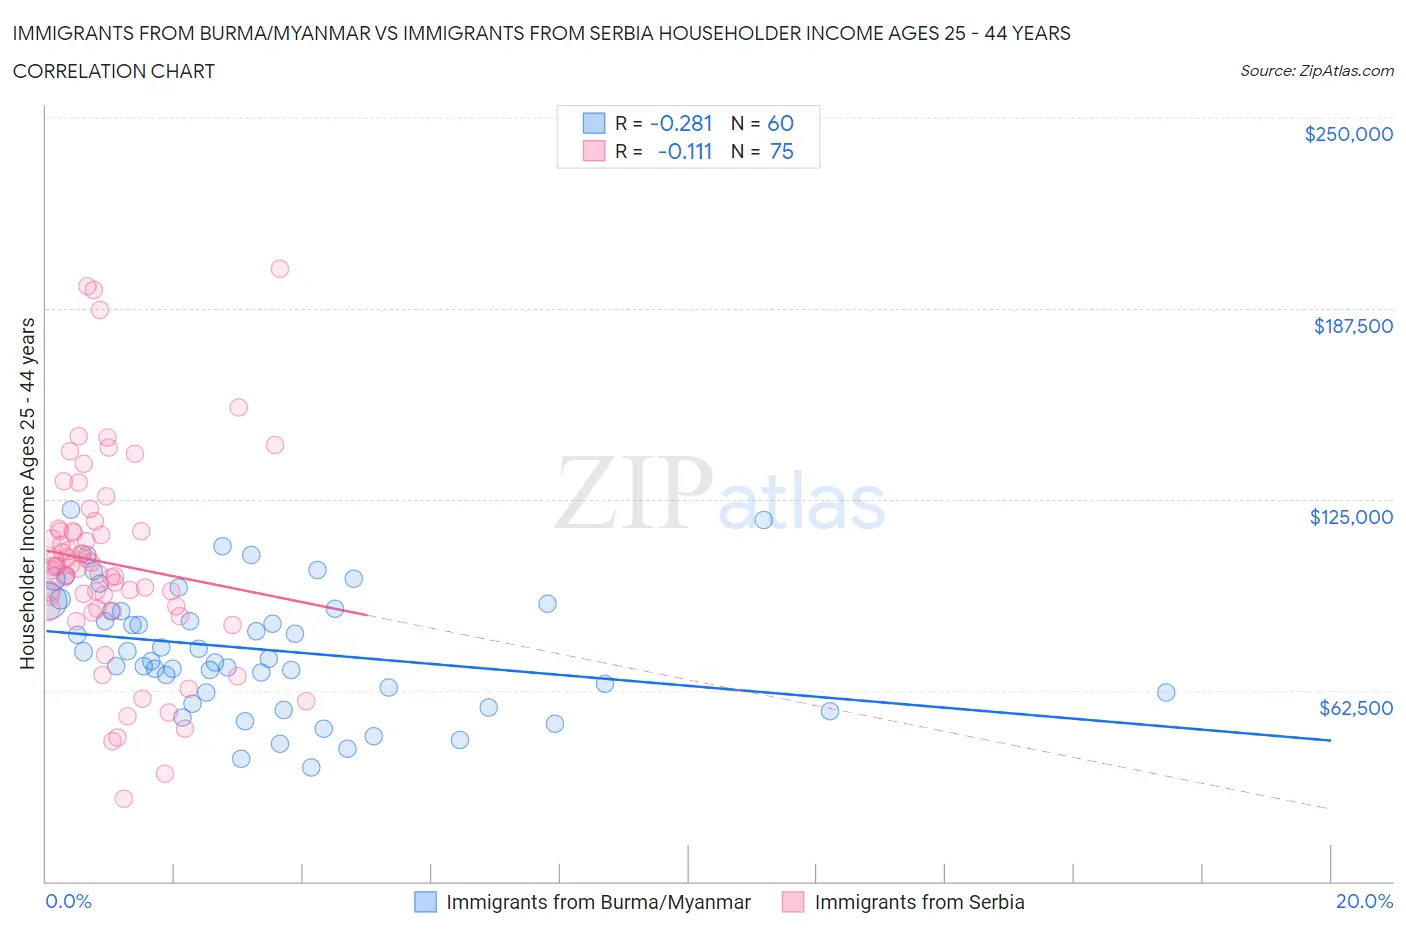 Immigrants from Burma/Myanmar vs Immigrants from Serbia Householder Income Ages 25 - 44 years